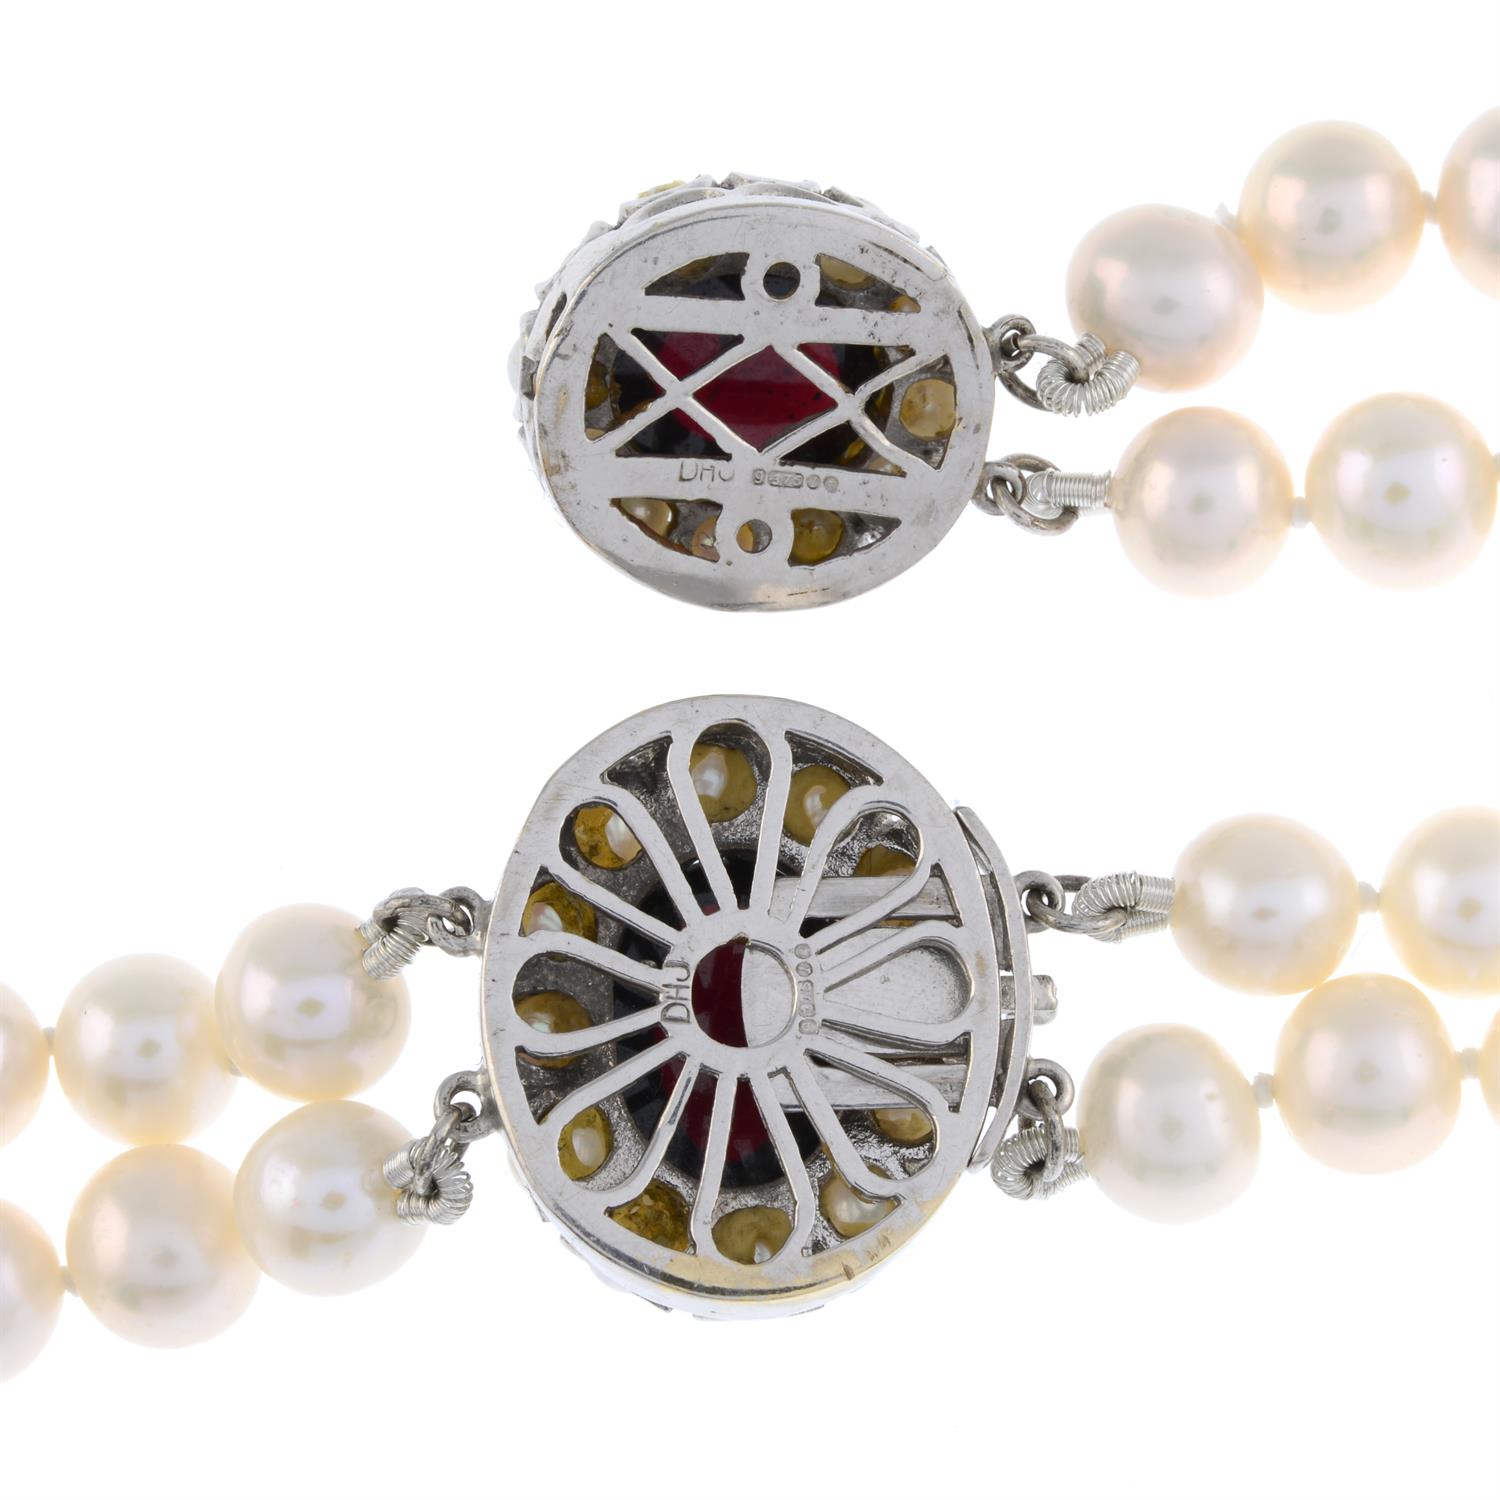 Cultured pearl two-row necklace and bracelet - Image 5 of 6